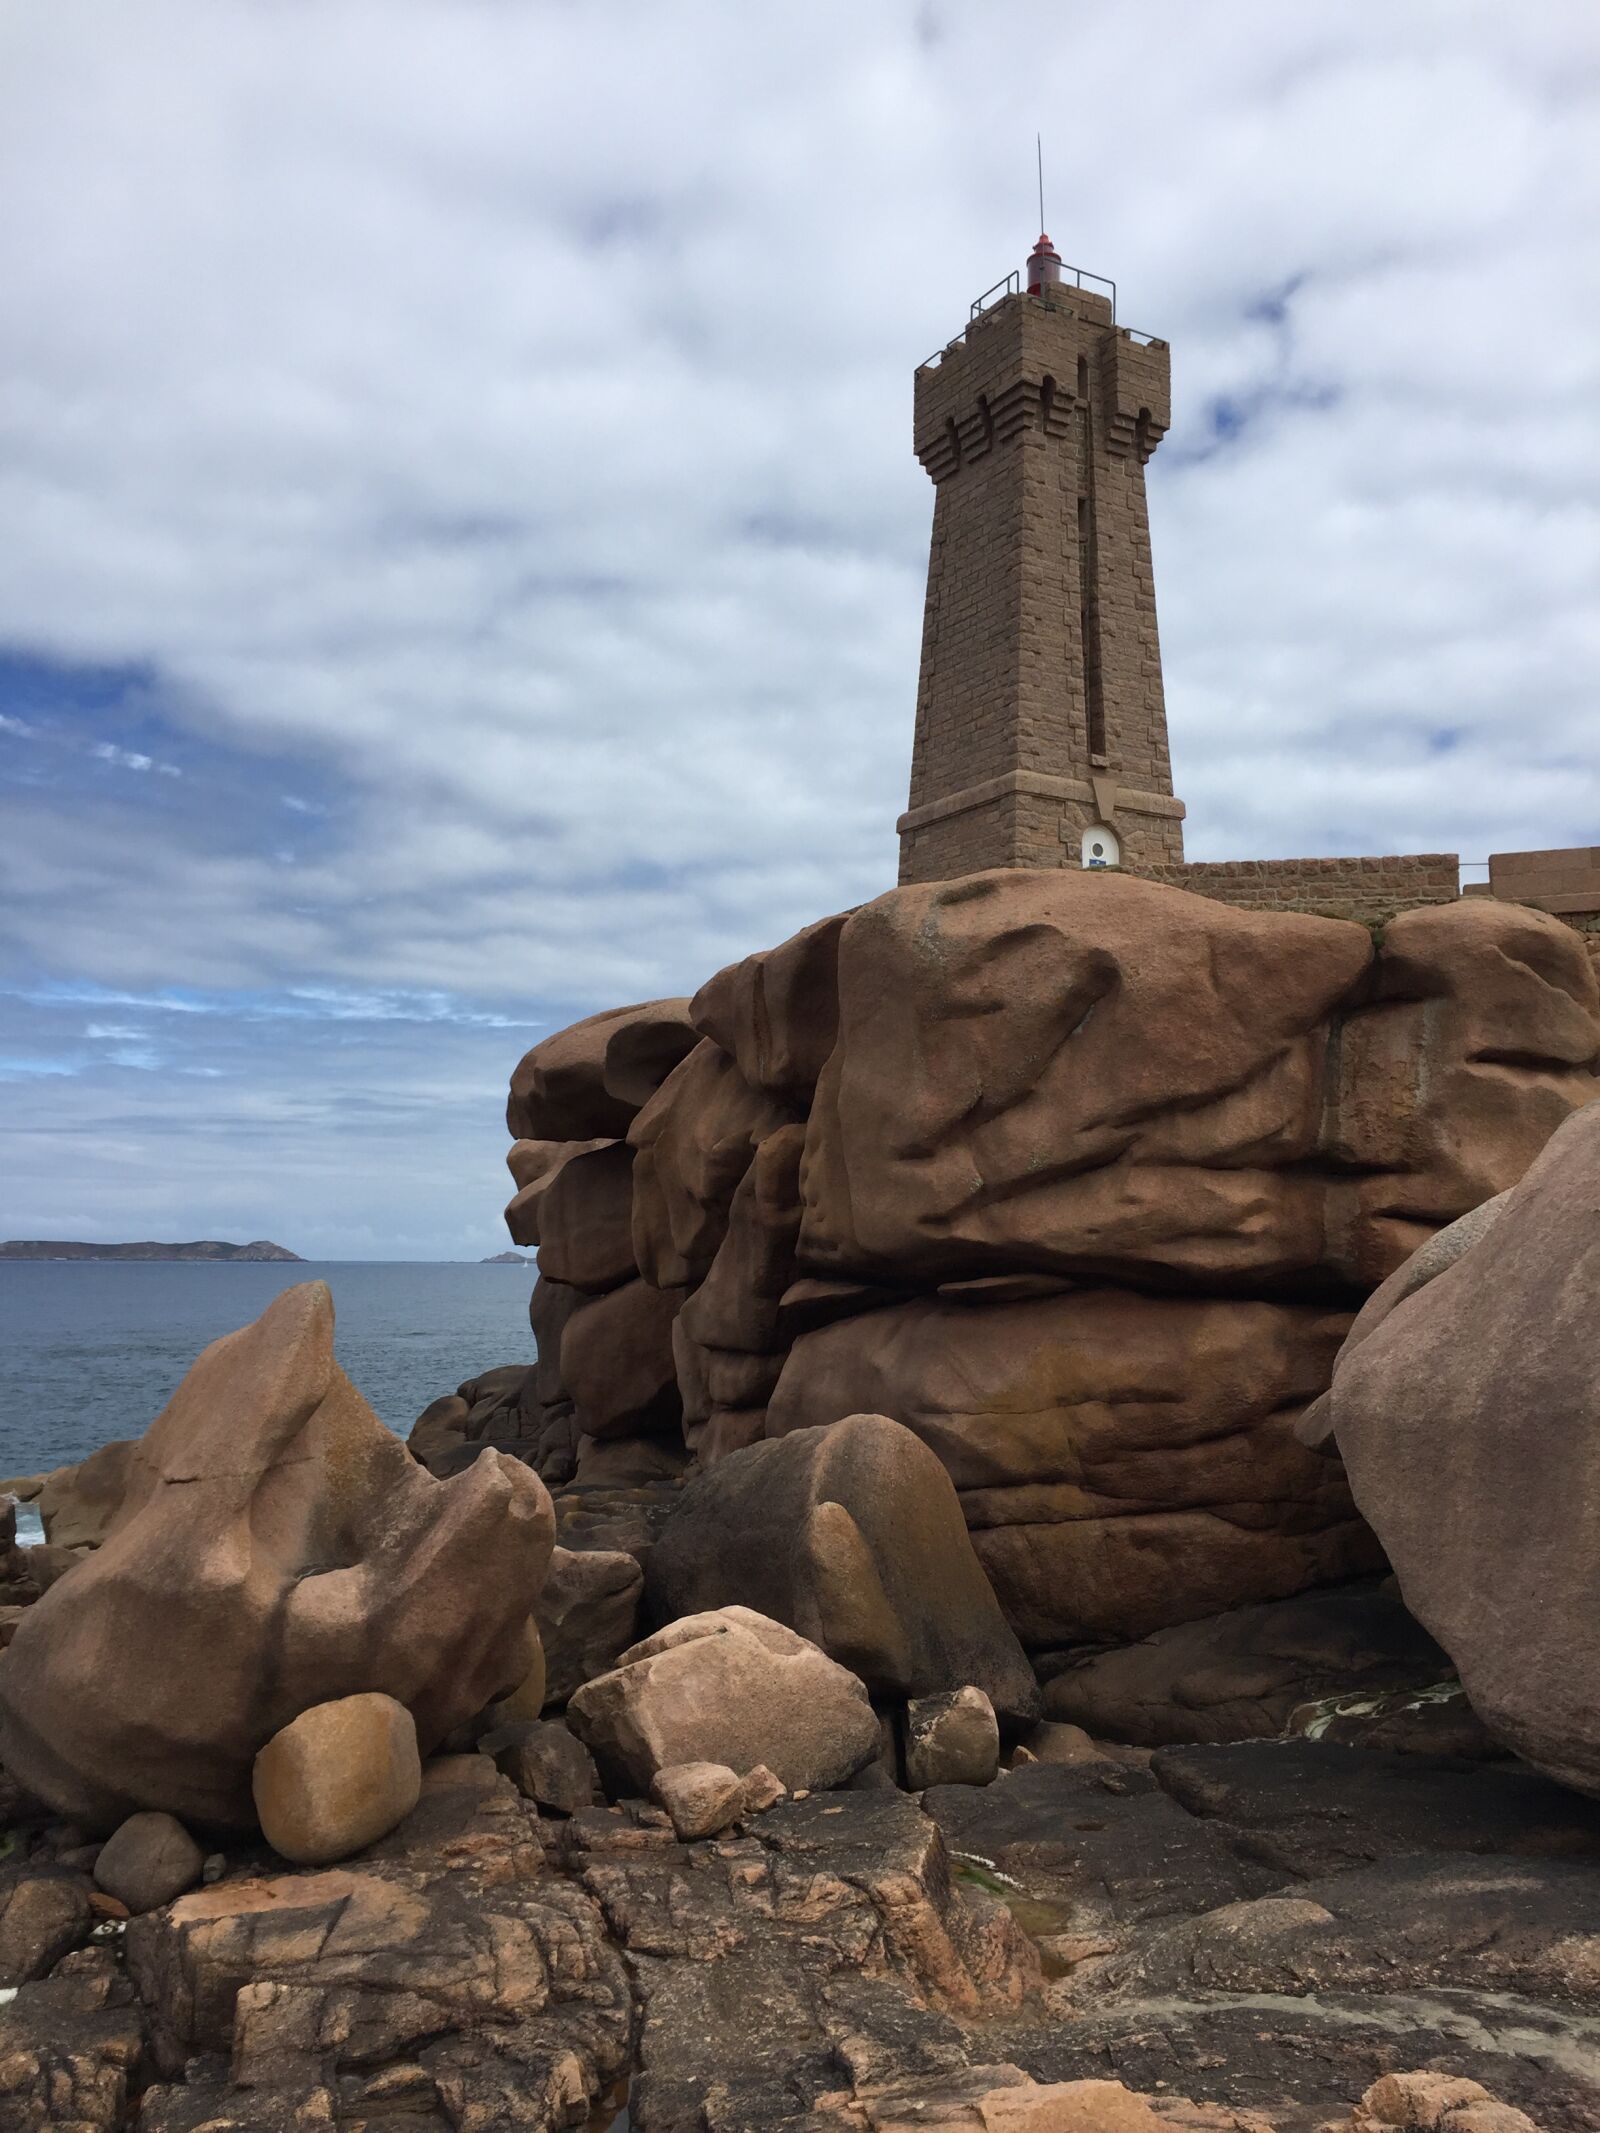 Apple iPhone 6 sample photo. Lighthouse, brittany, brittany coast photography